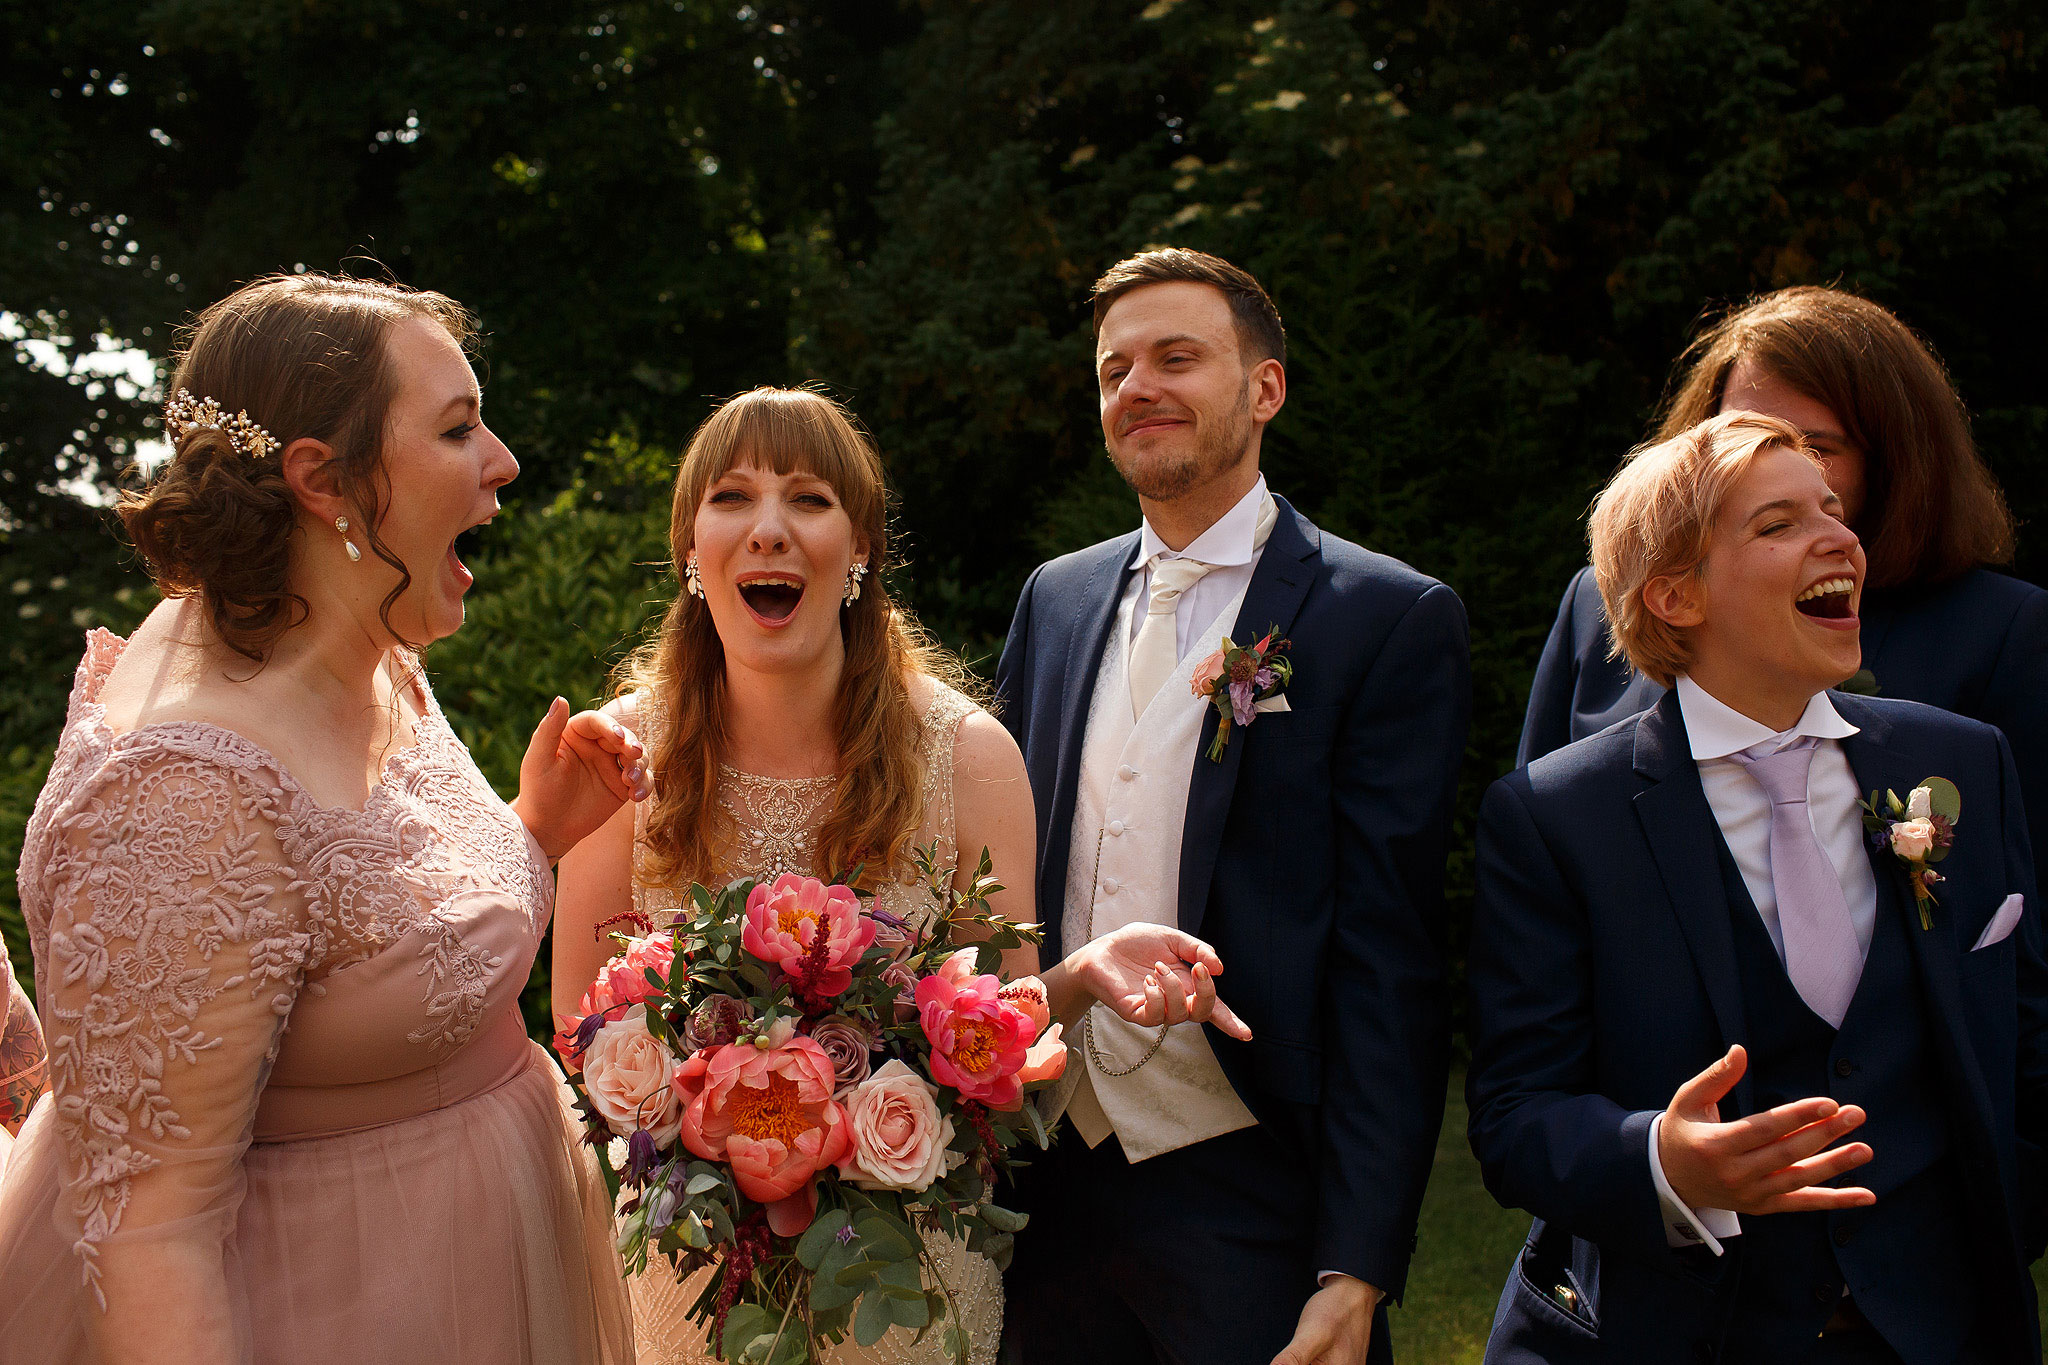 Bridesmaids and groomsmen laughing during bridal party portraits - The Villa at Wrea Green Wedding Photography - Toni Darcy Photography